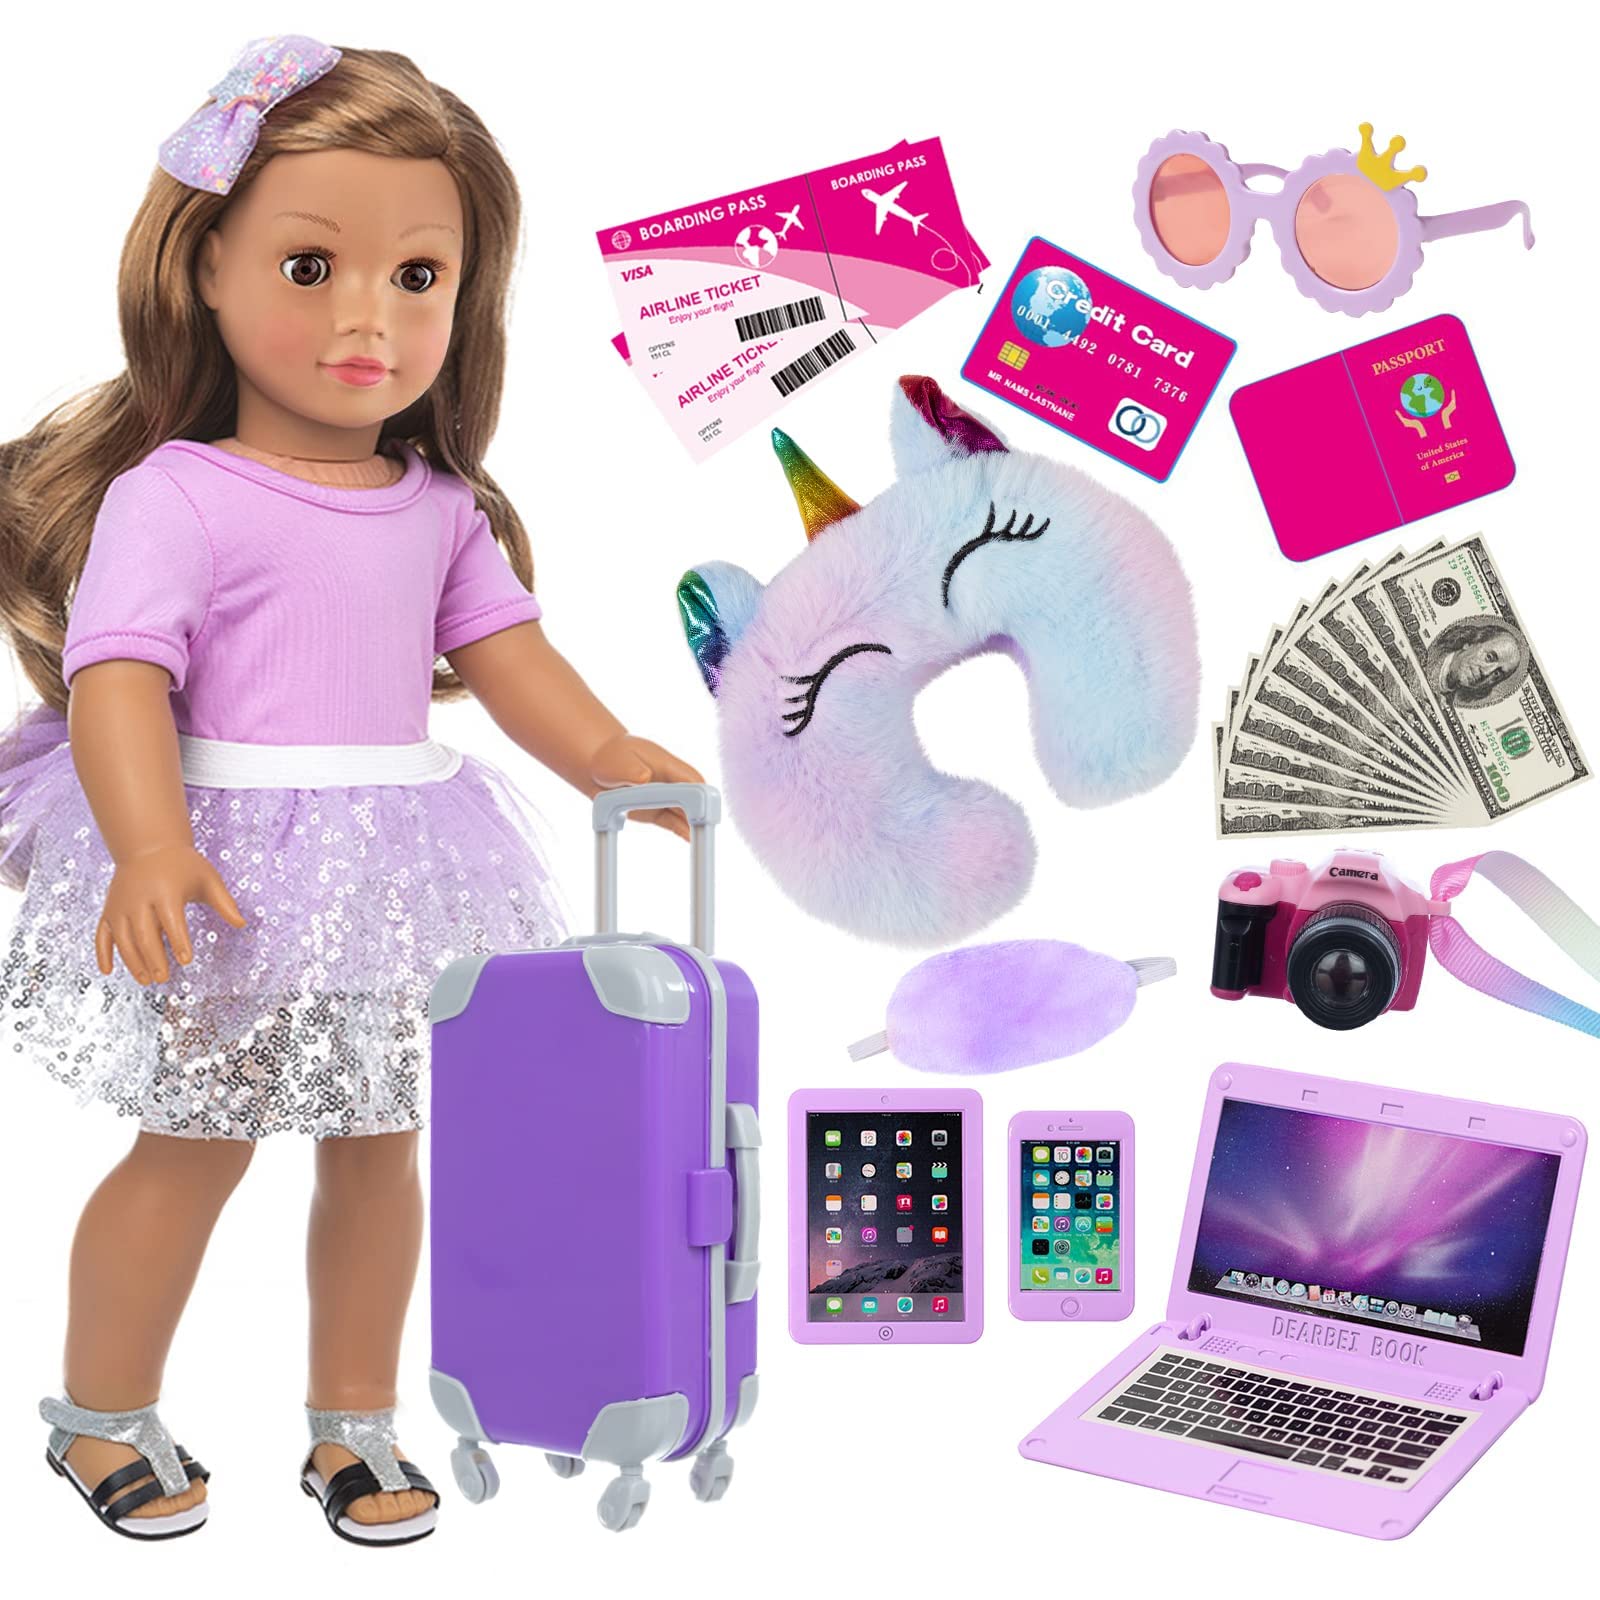 ZNTWEI 18 Inch Girl Doll Travel Suitcase Play Set with 18 Inch Doll Clothes and Accessories Including Sunglasses Camera Computer Phone Ipad Travel Pillow ect